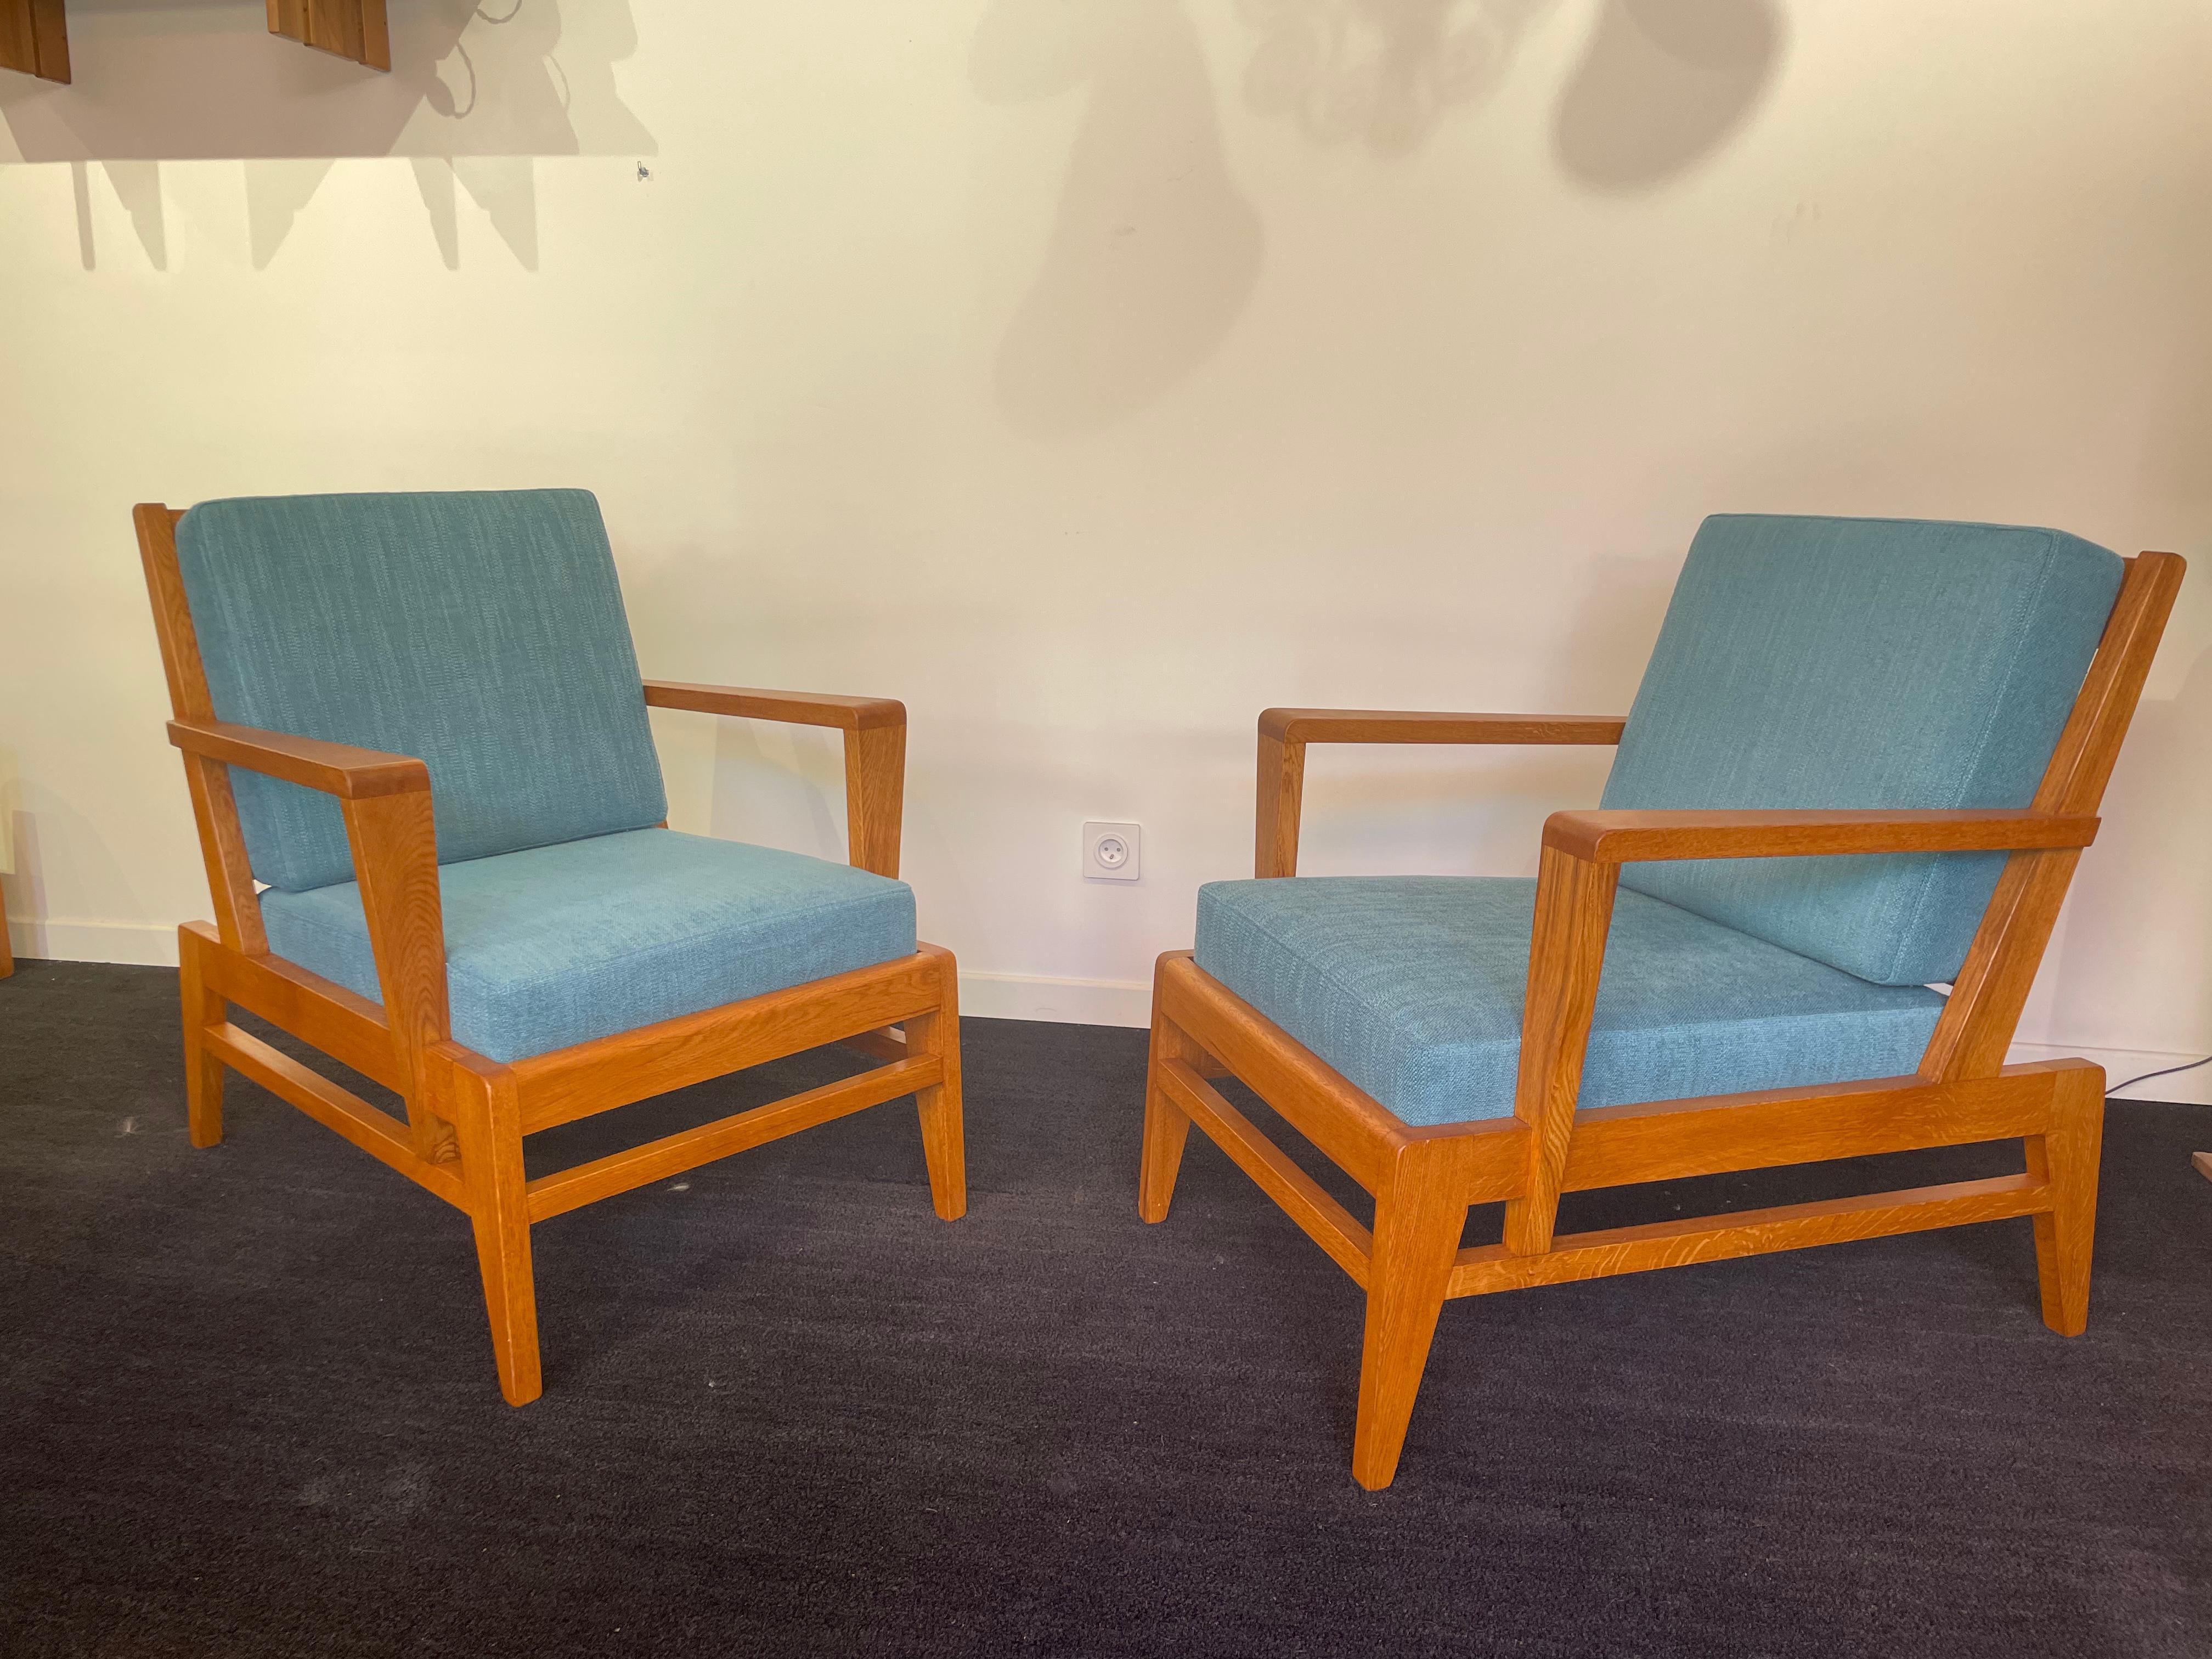  pair of oak armchairs  
circa 1946

His notoriety in serial production is growing
In 1945
 he was appointed president of the Society of Decorative Artists.  Several years of teaching at the National School of Decorative Arts will follow, during